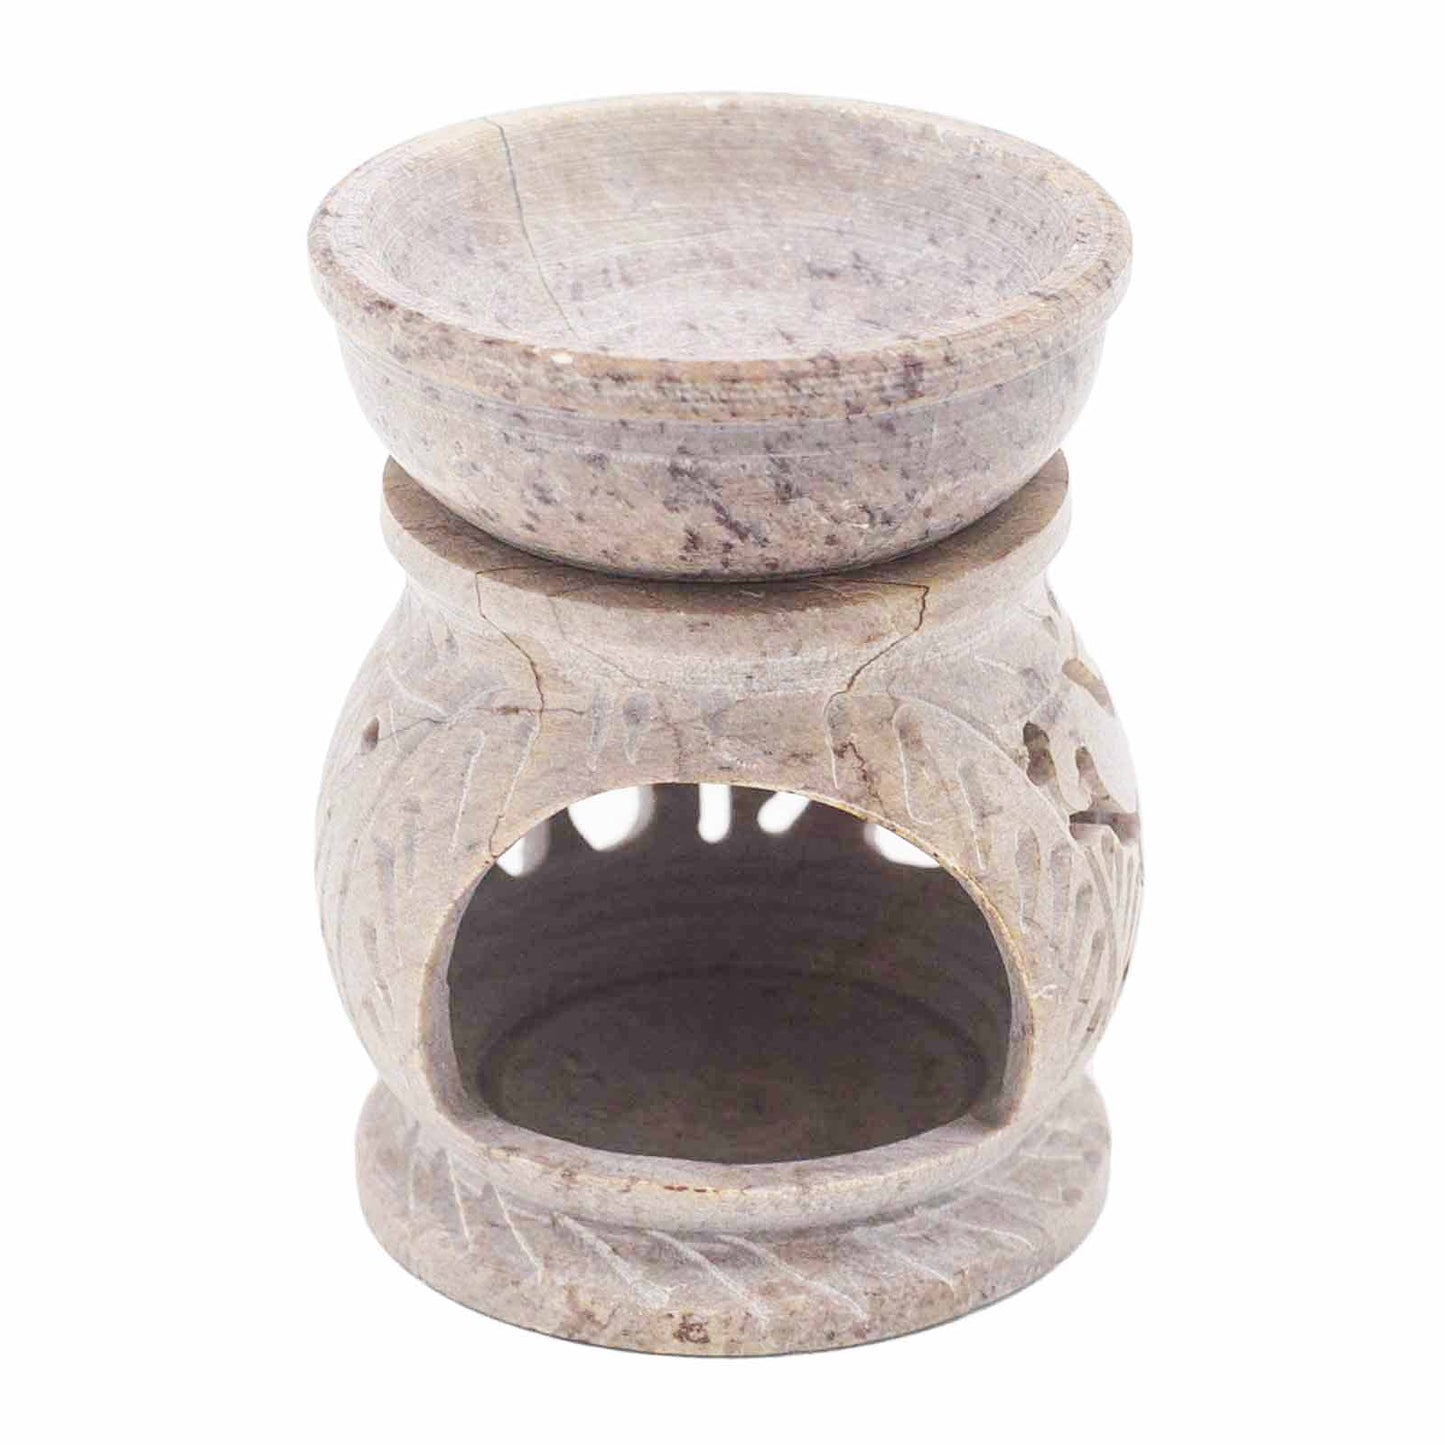 Stone aroma lamp - For wisdom and luck